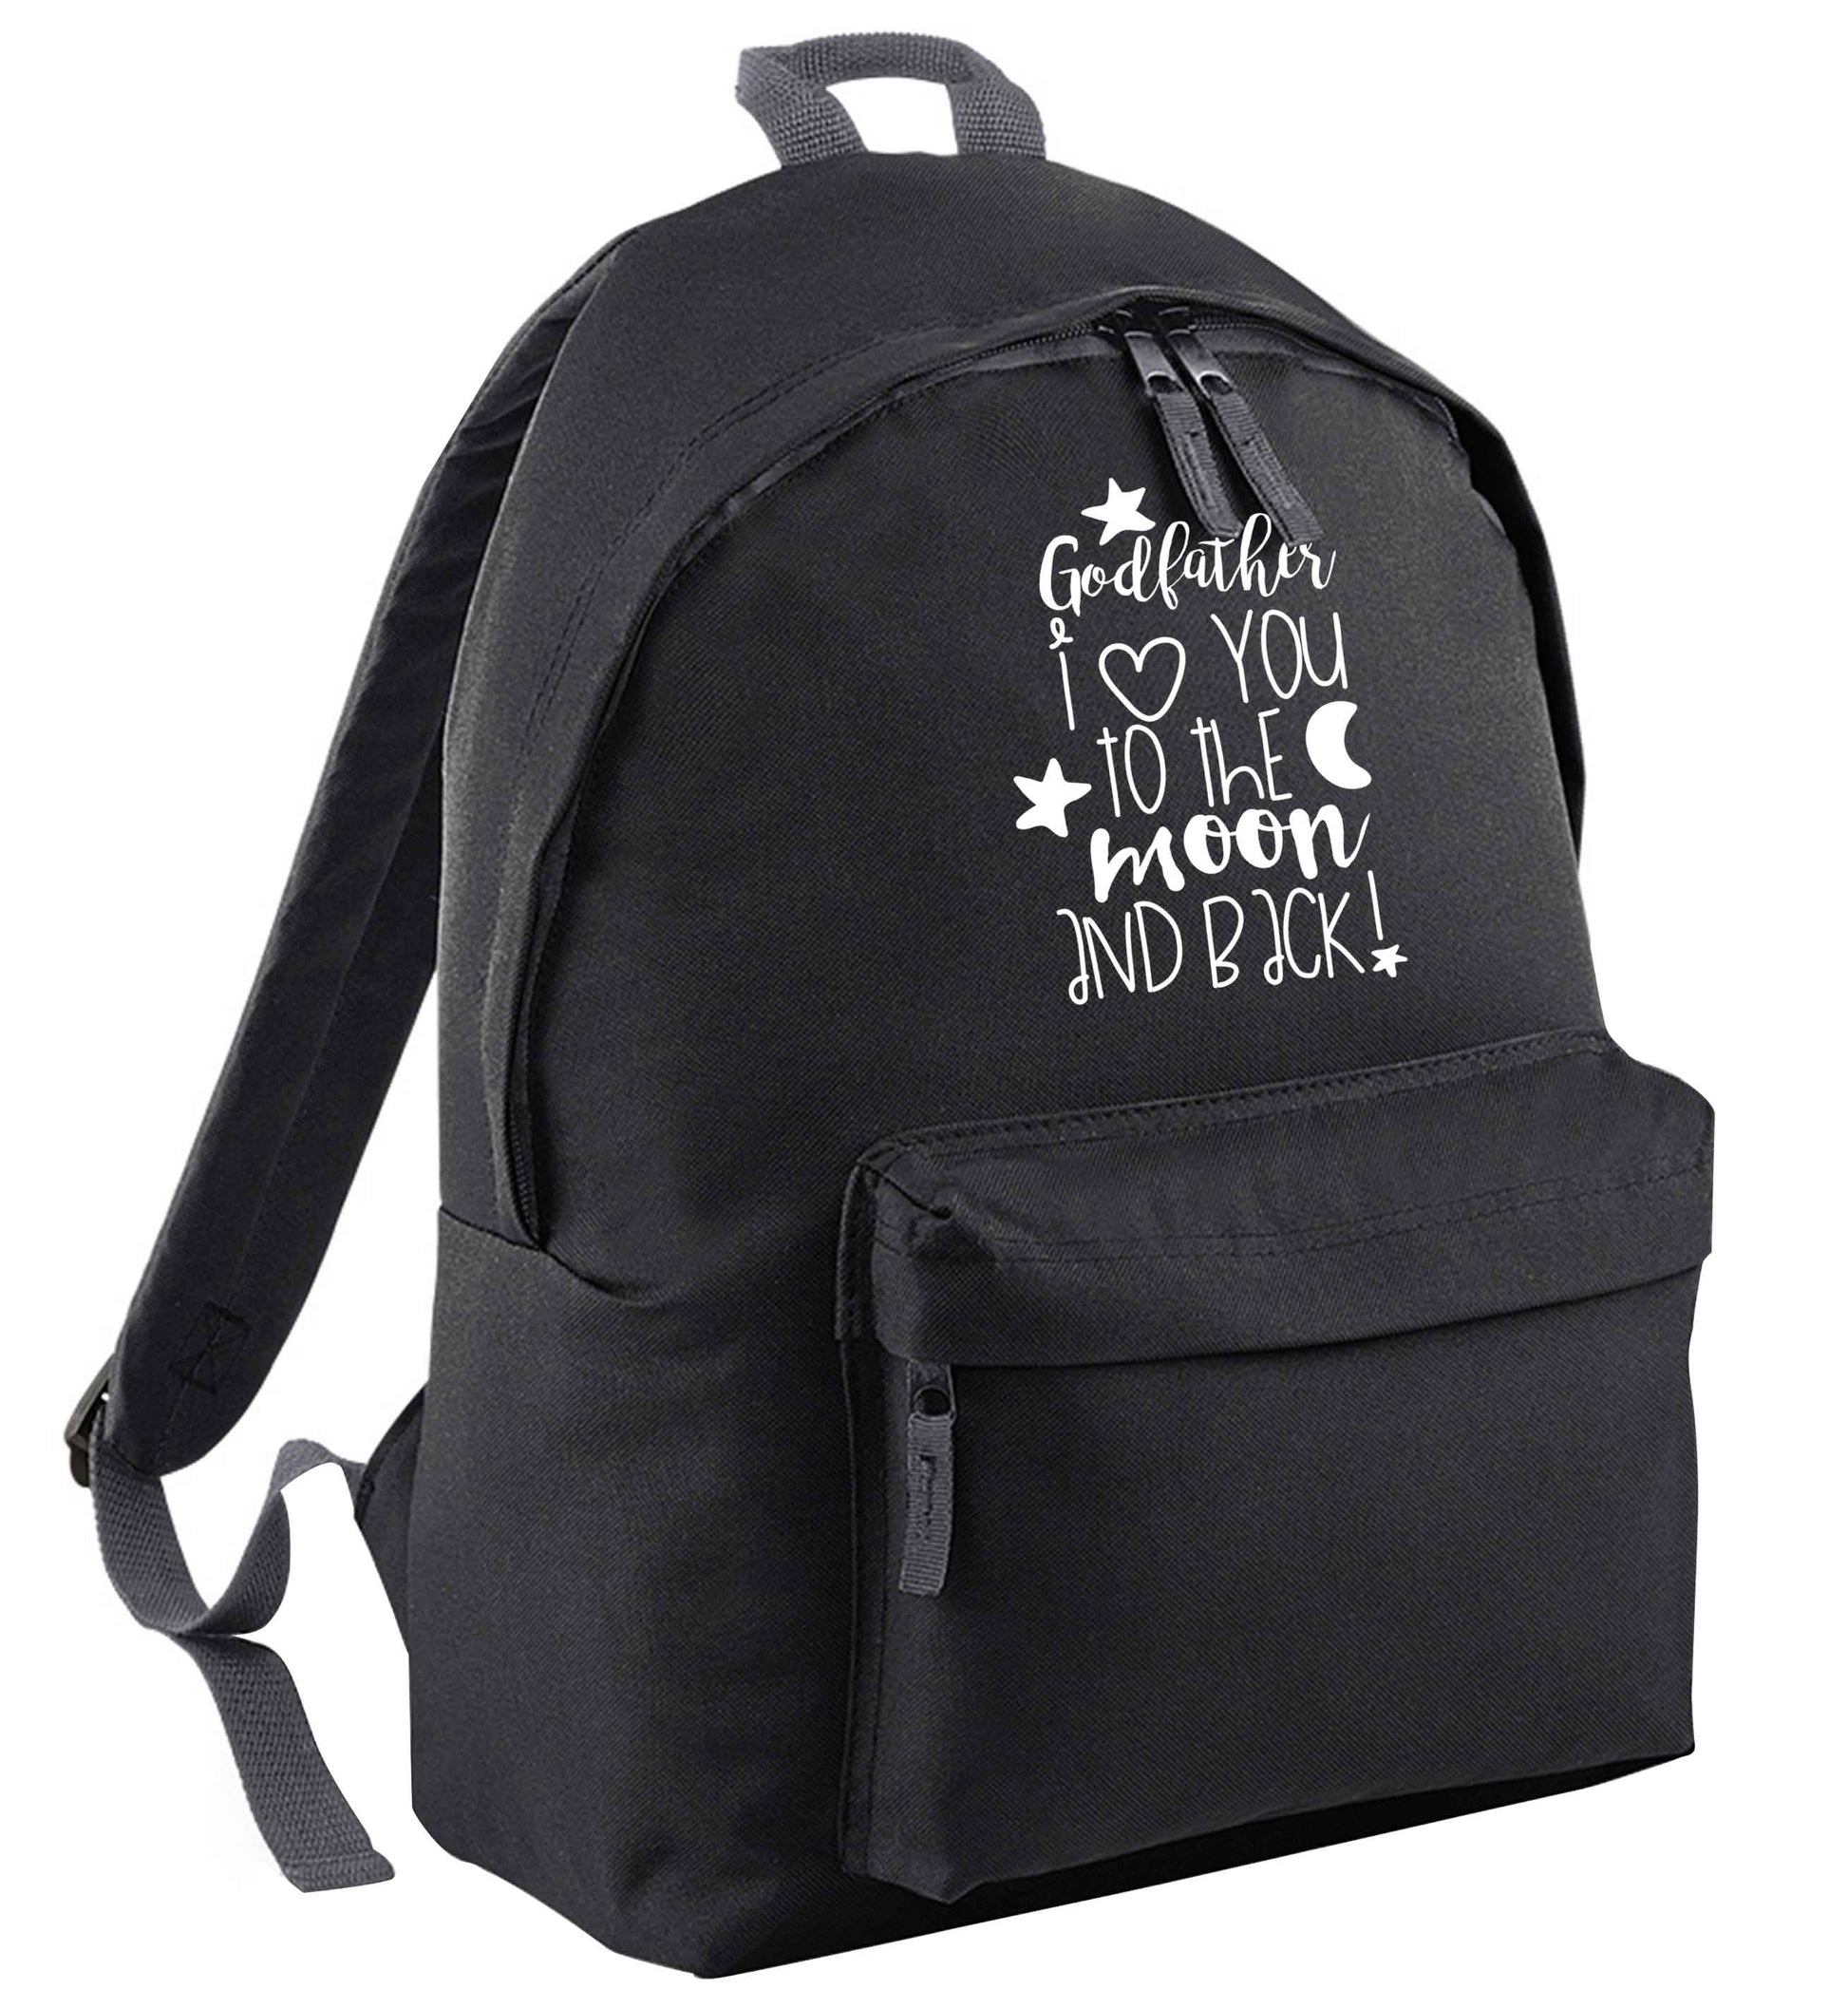 Godfather I love you to the moon and back black adults backpack